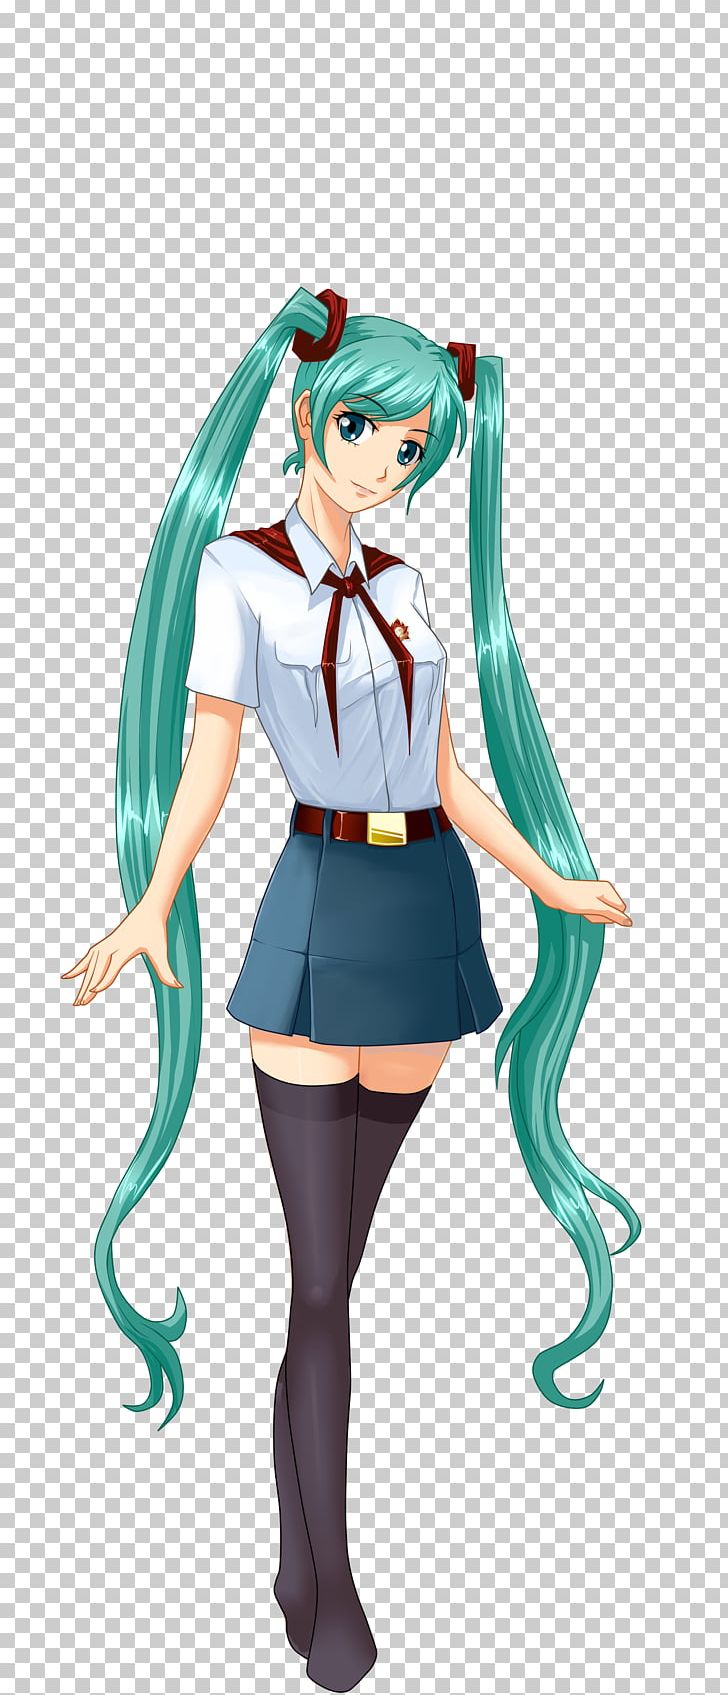 Everlasting Summer Video Game Walkthrough Steam Hatsune Miku Category Of Being PNG, Clipart, Anime, Black Hair, Brown Hair, Clothing, Com Free PNG Download